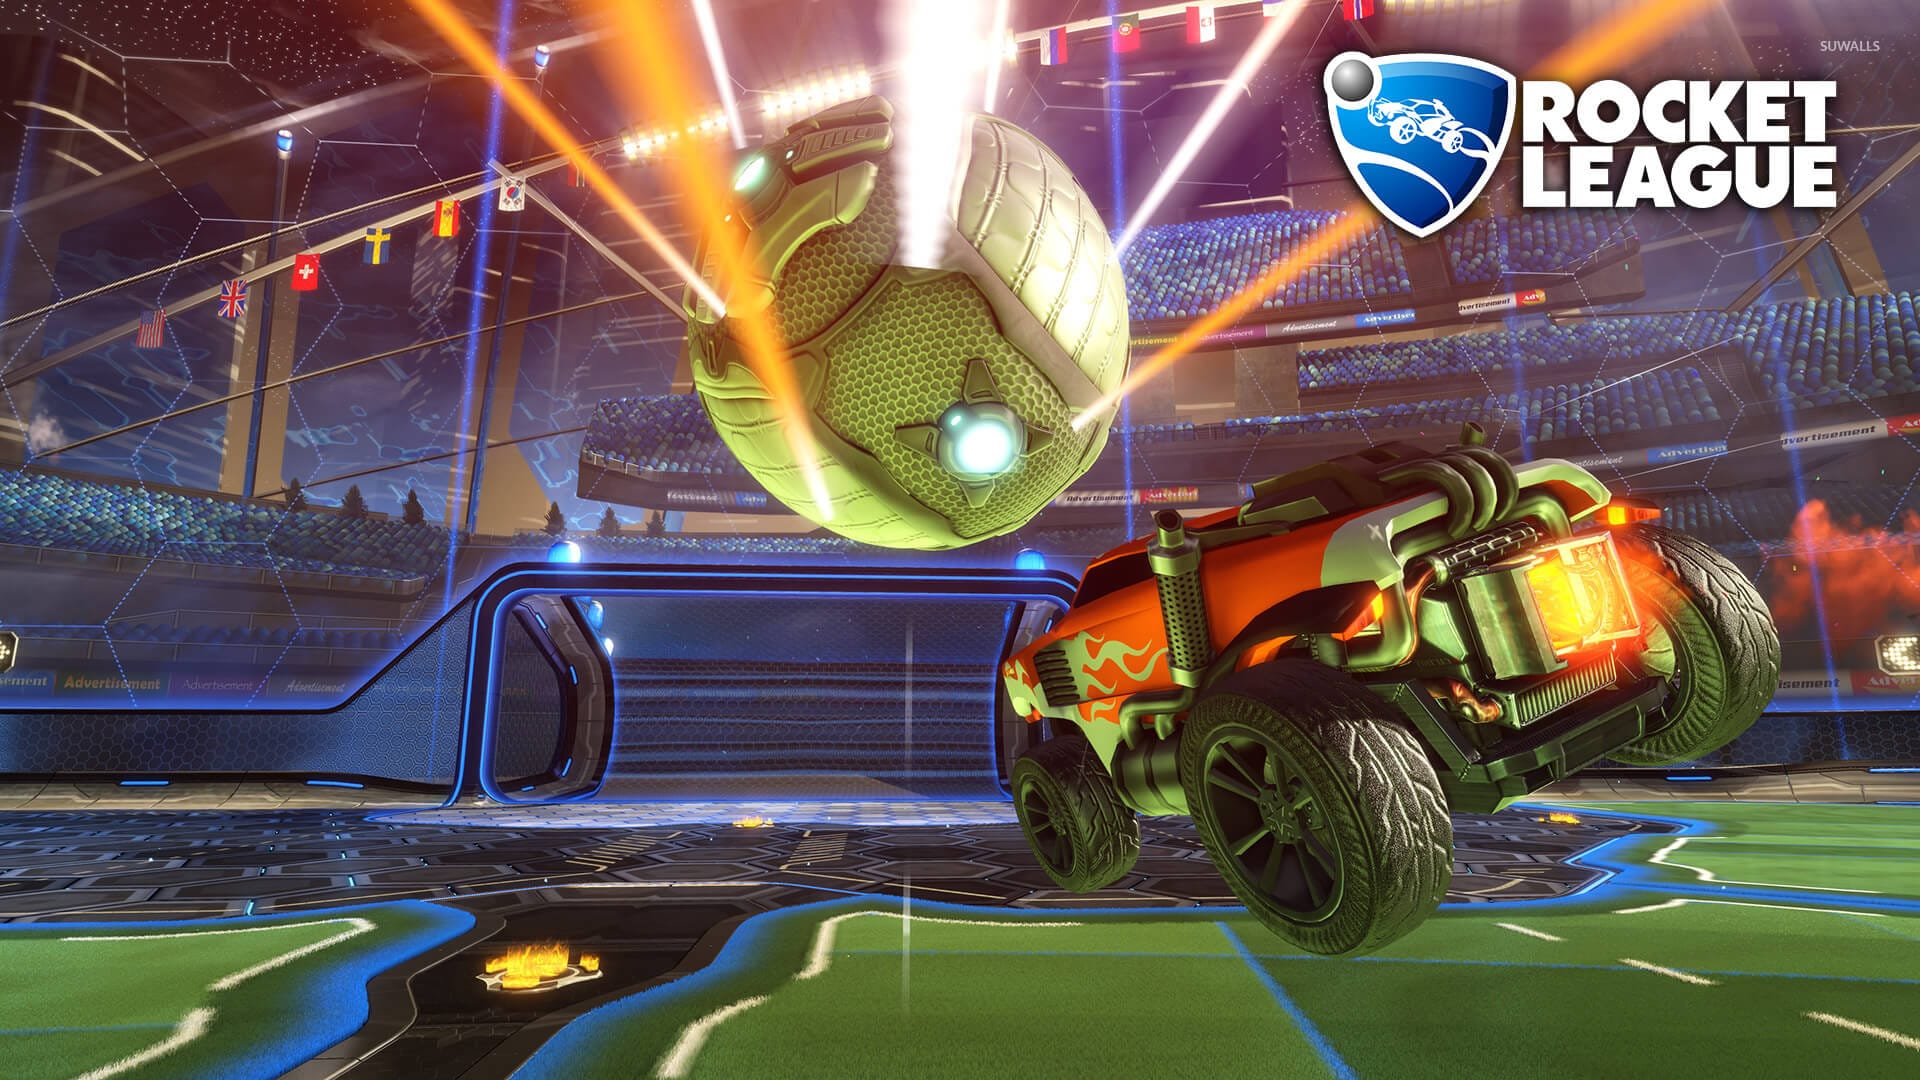 Free-to-play Rocket League won't require PS Plus, Nintendo Switch